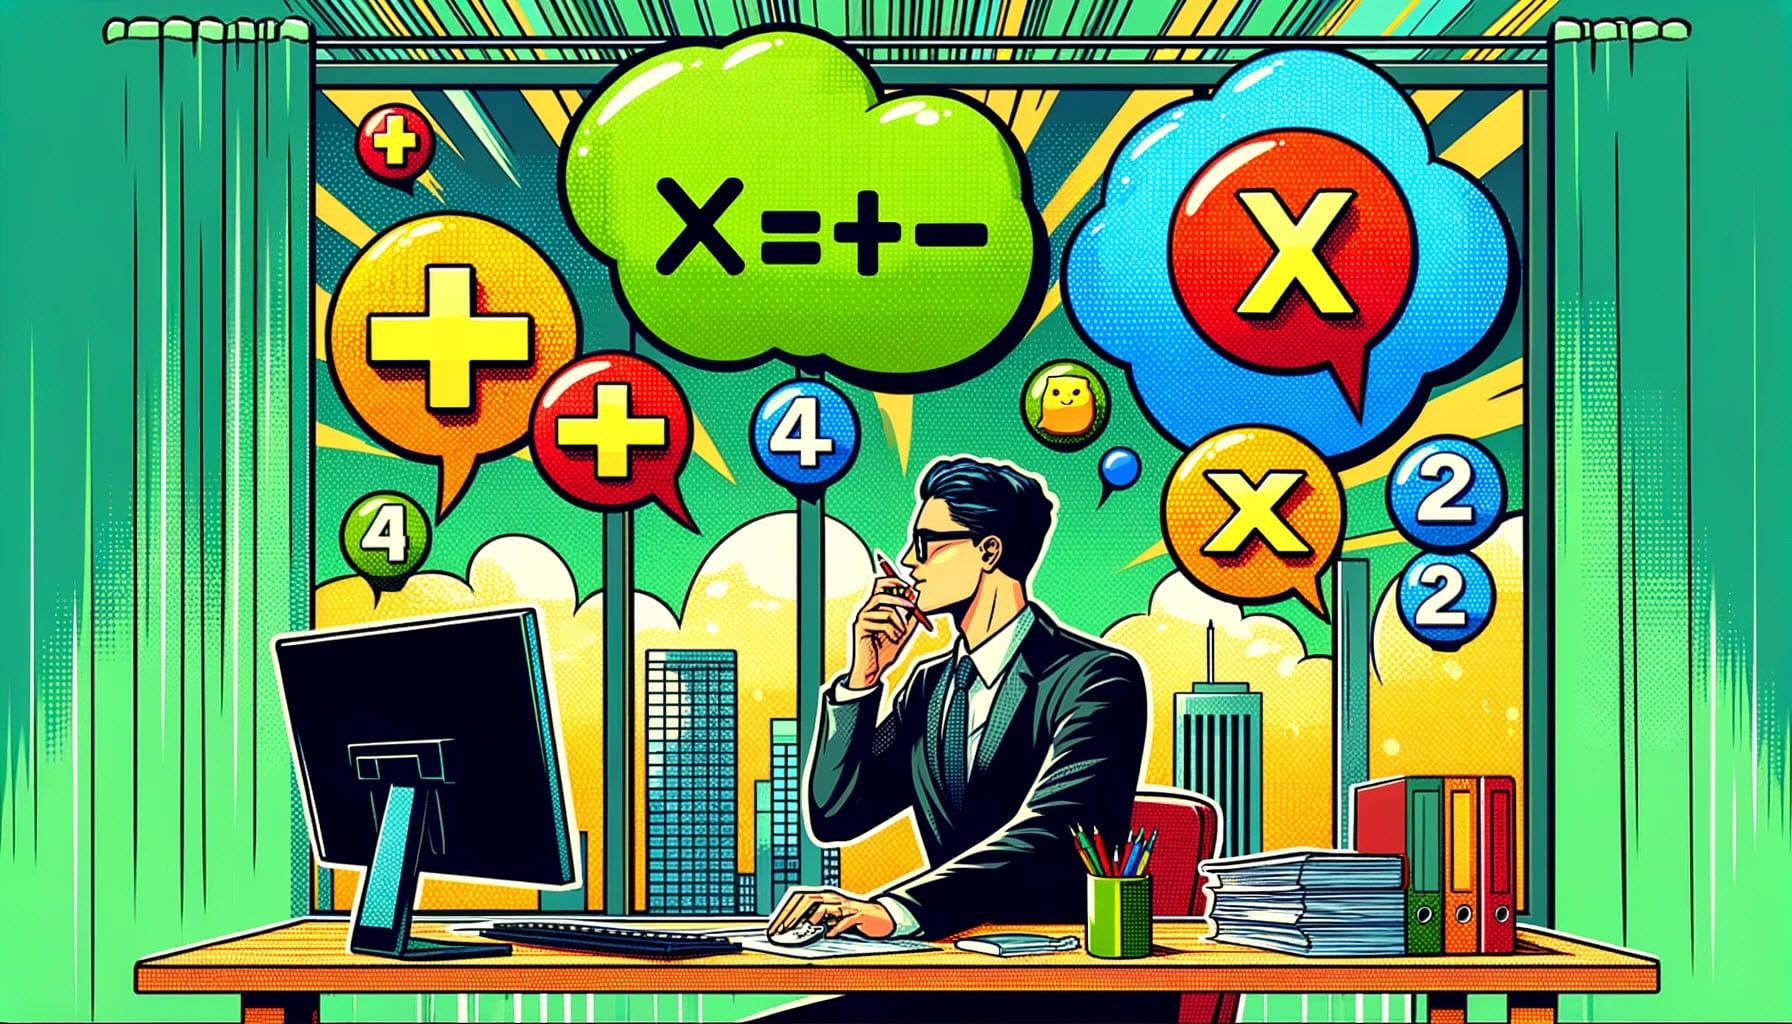 image shows a person in a business environment using Excel for basic calculations. The scene is enhanced with vibrant bubbles containing symbols for addition, subtraction, multiplication, and division, reflecting the dynamic and fun nature of working with Excel in a professional setting.